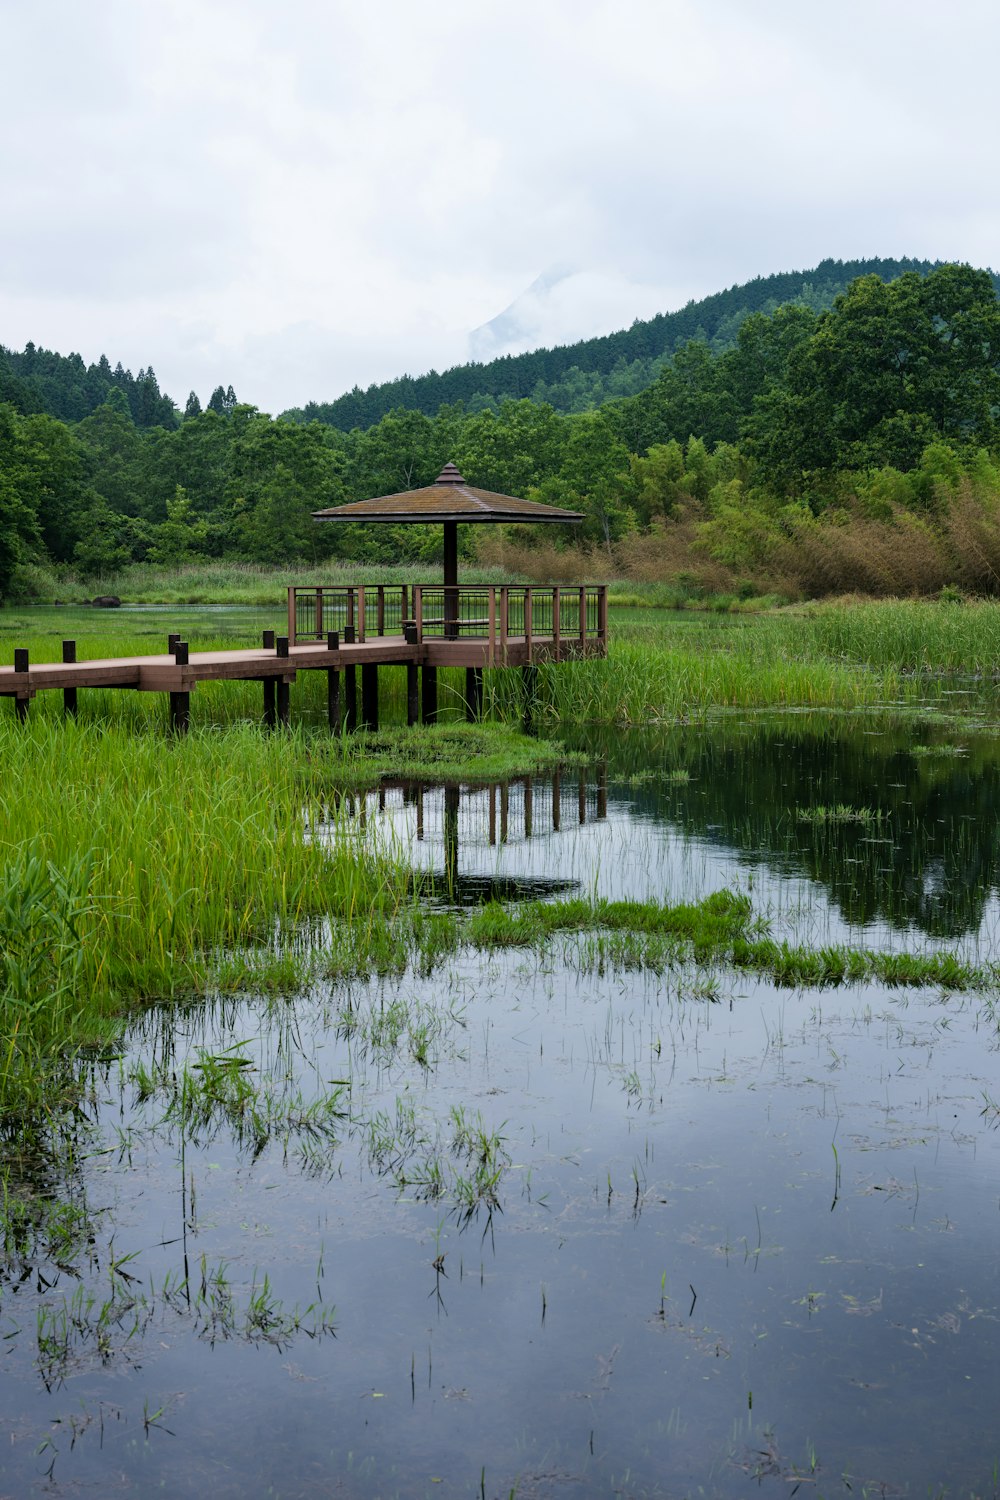 a wooden dock sitting in the middle of a lush green field